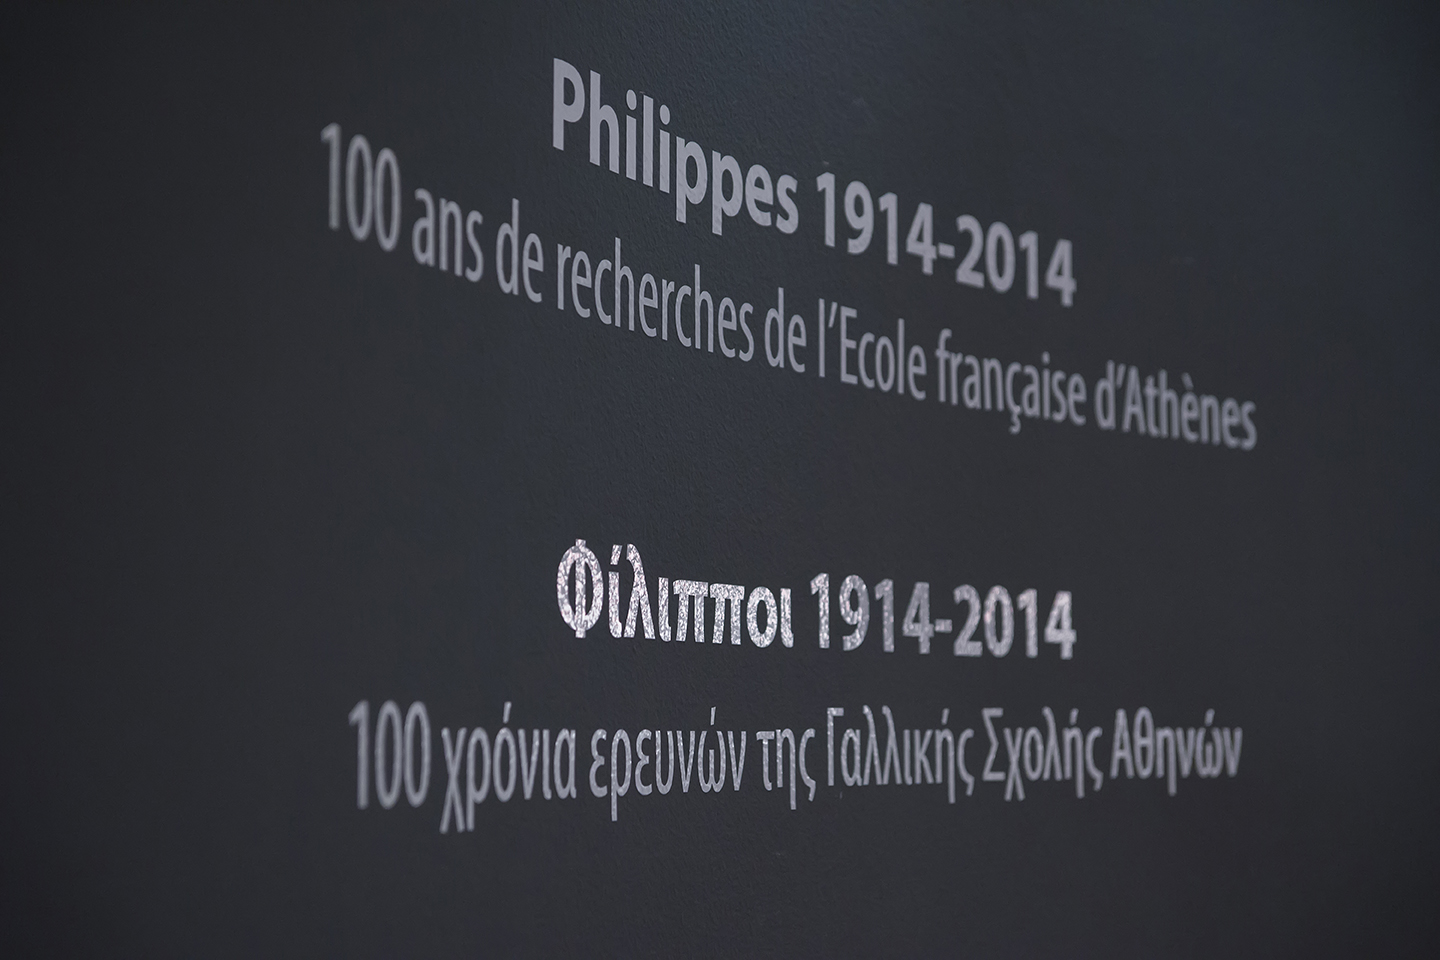 Philippi 1914-2014. One hundred years of research of the French School of Athens